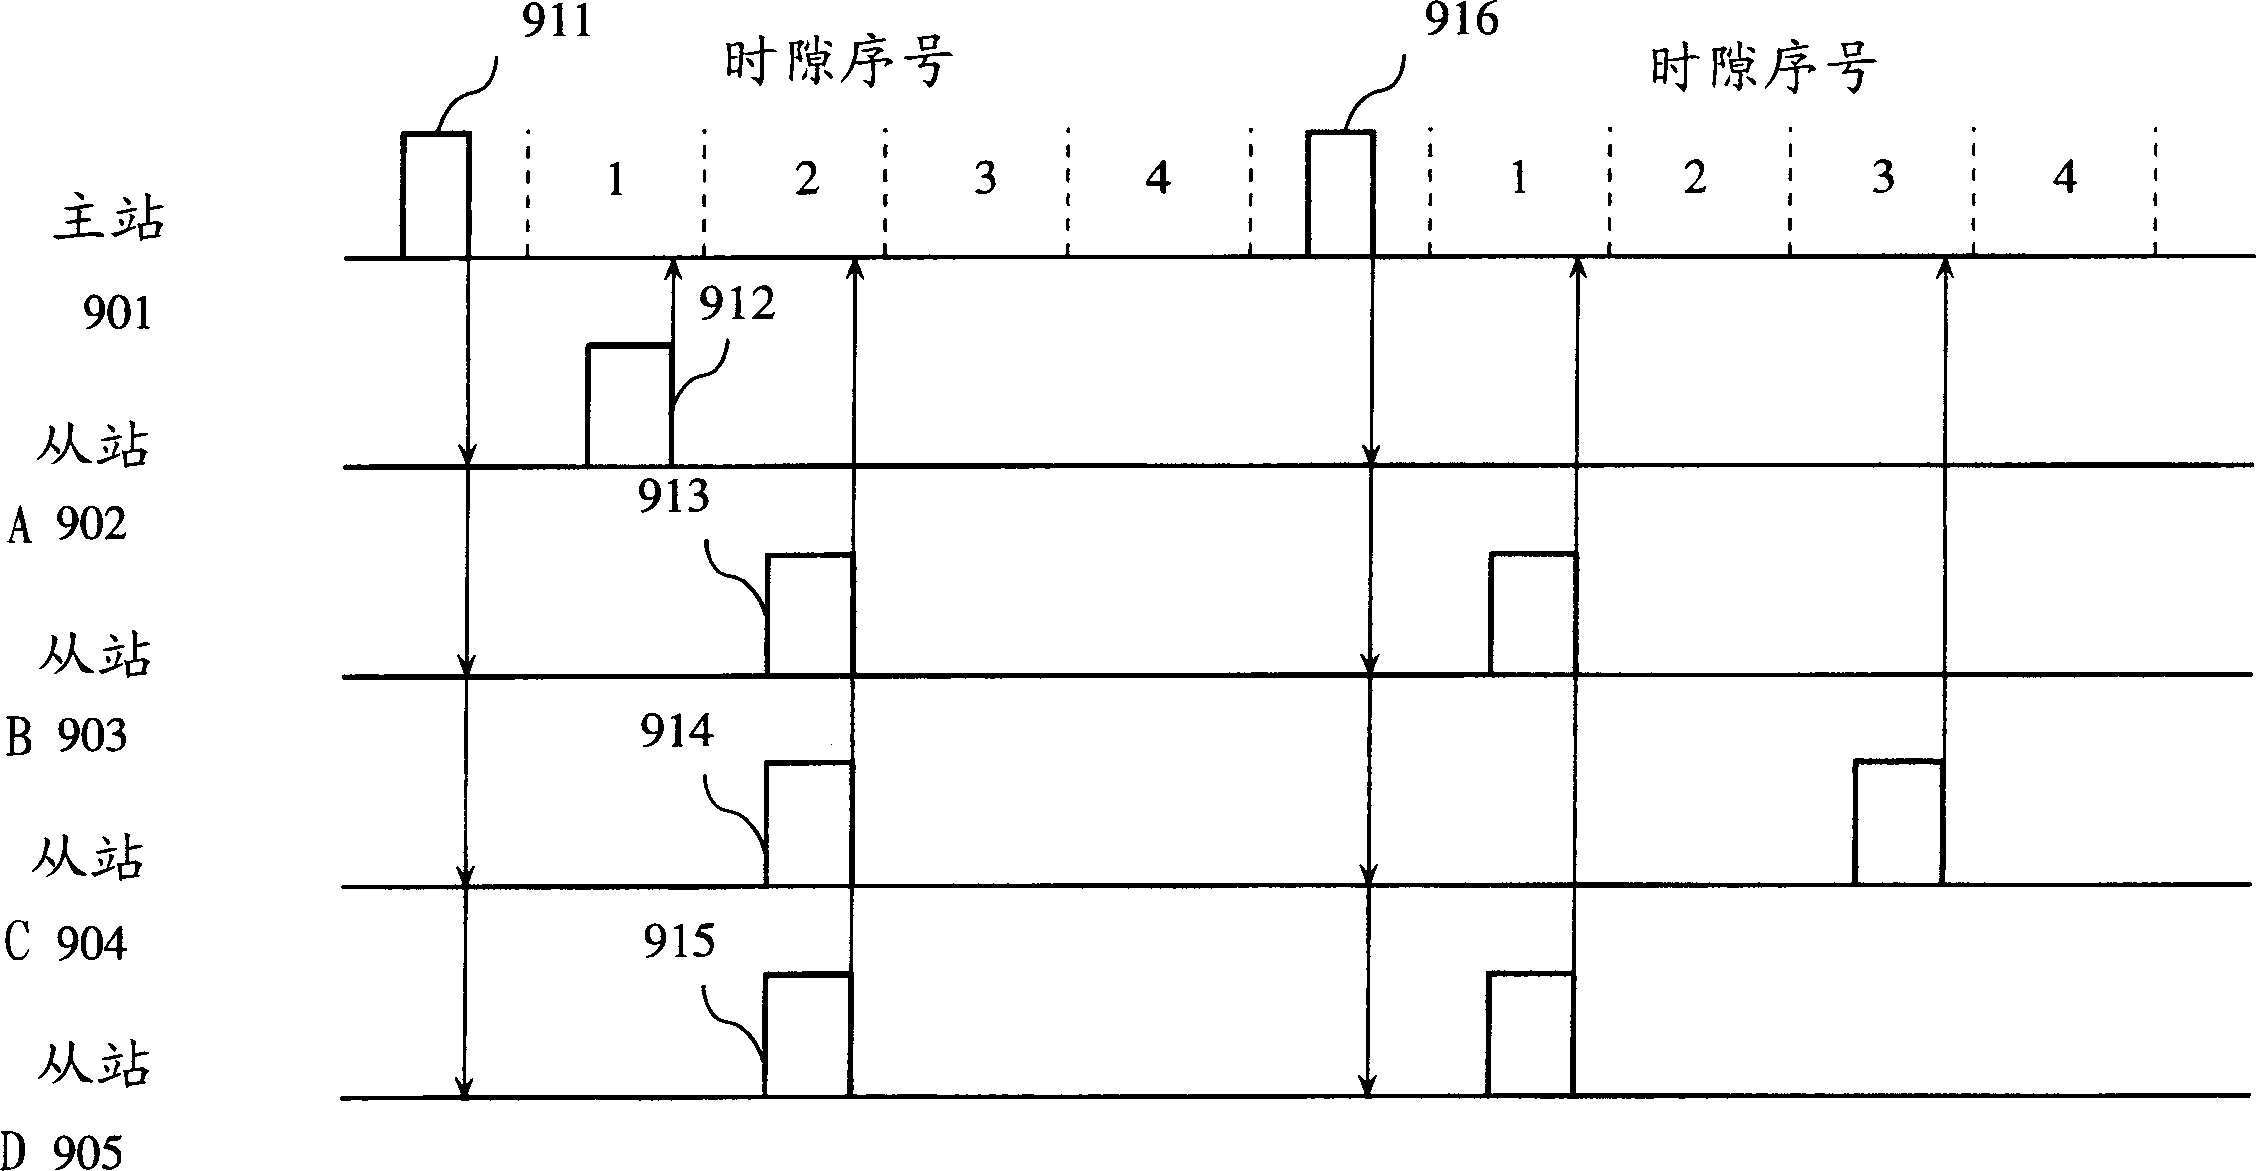 Information communication system, noncontactic IC card and IC chip